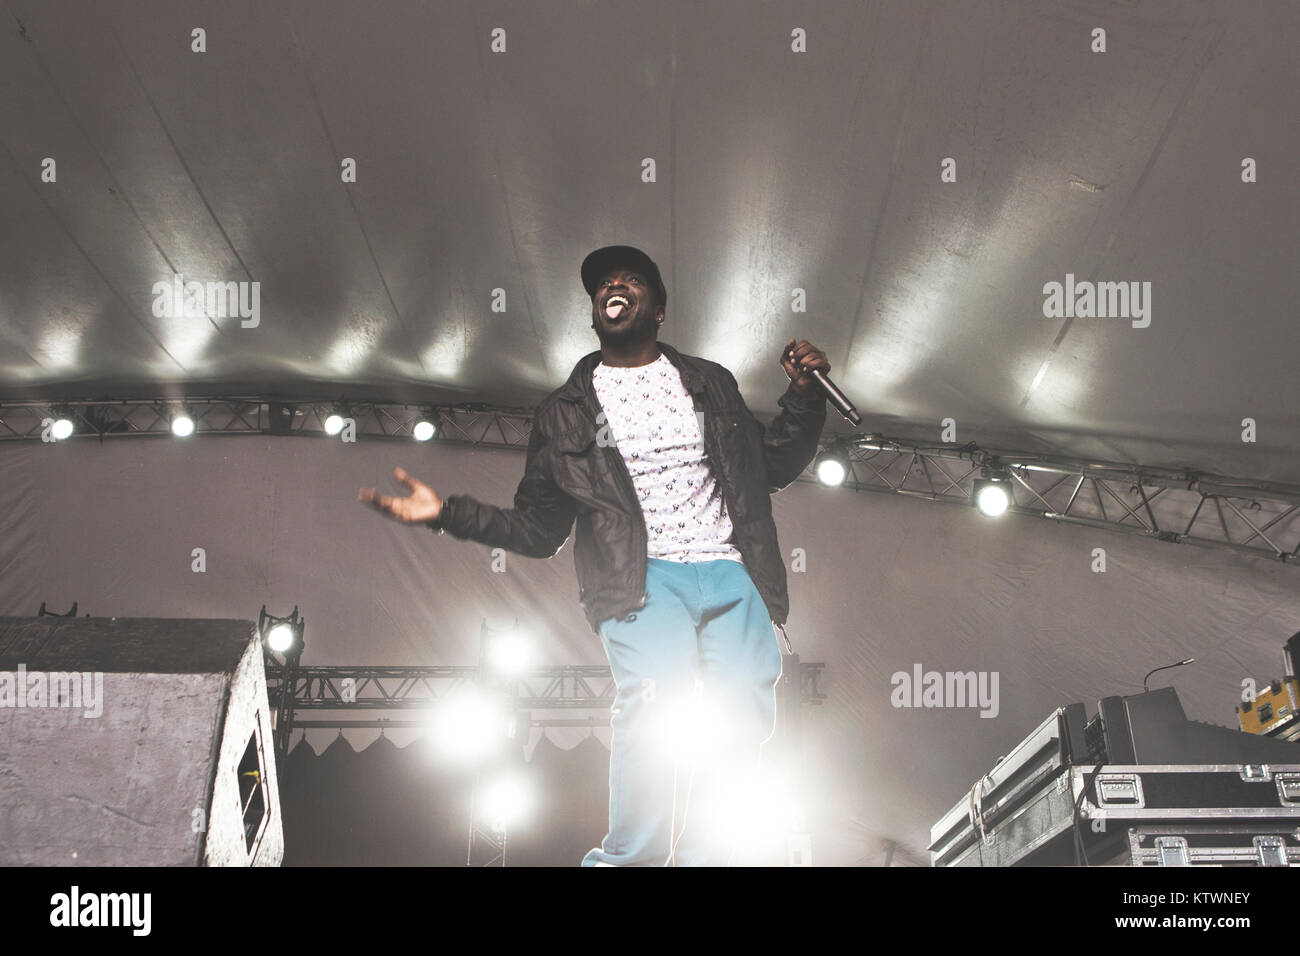 The American rap and hip hop group The Pharcyde performs a live concert at Vanguard Festival 2014 in Copenhagen. Here the rapper Imani is pictured live on stage. Denmark, 02/08 2014. Stock Photo